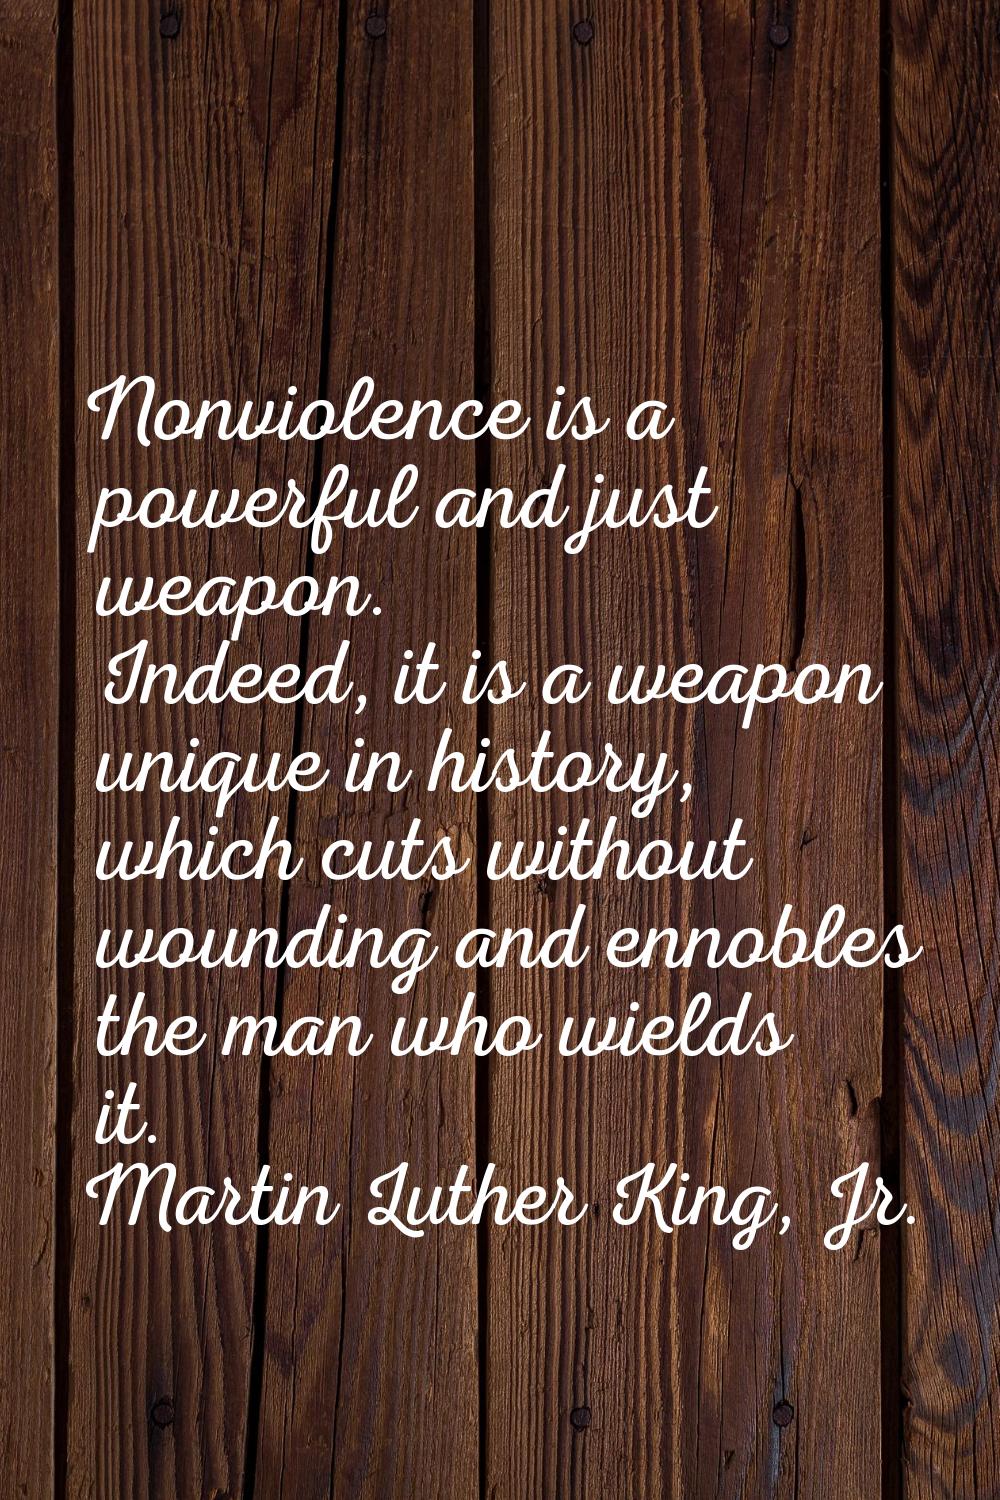 Nonviolence is a powerful and just weapon. Indeed, it is a weapon unique in history, which cuts wit